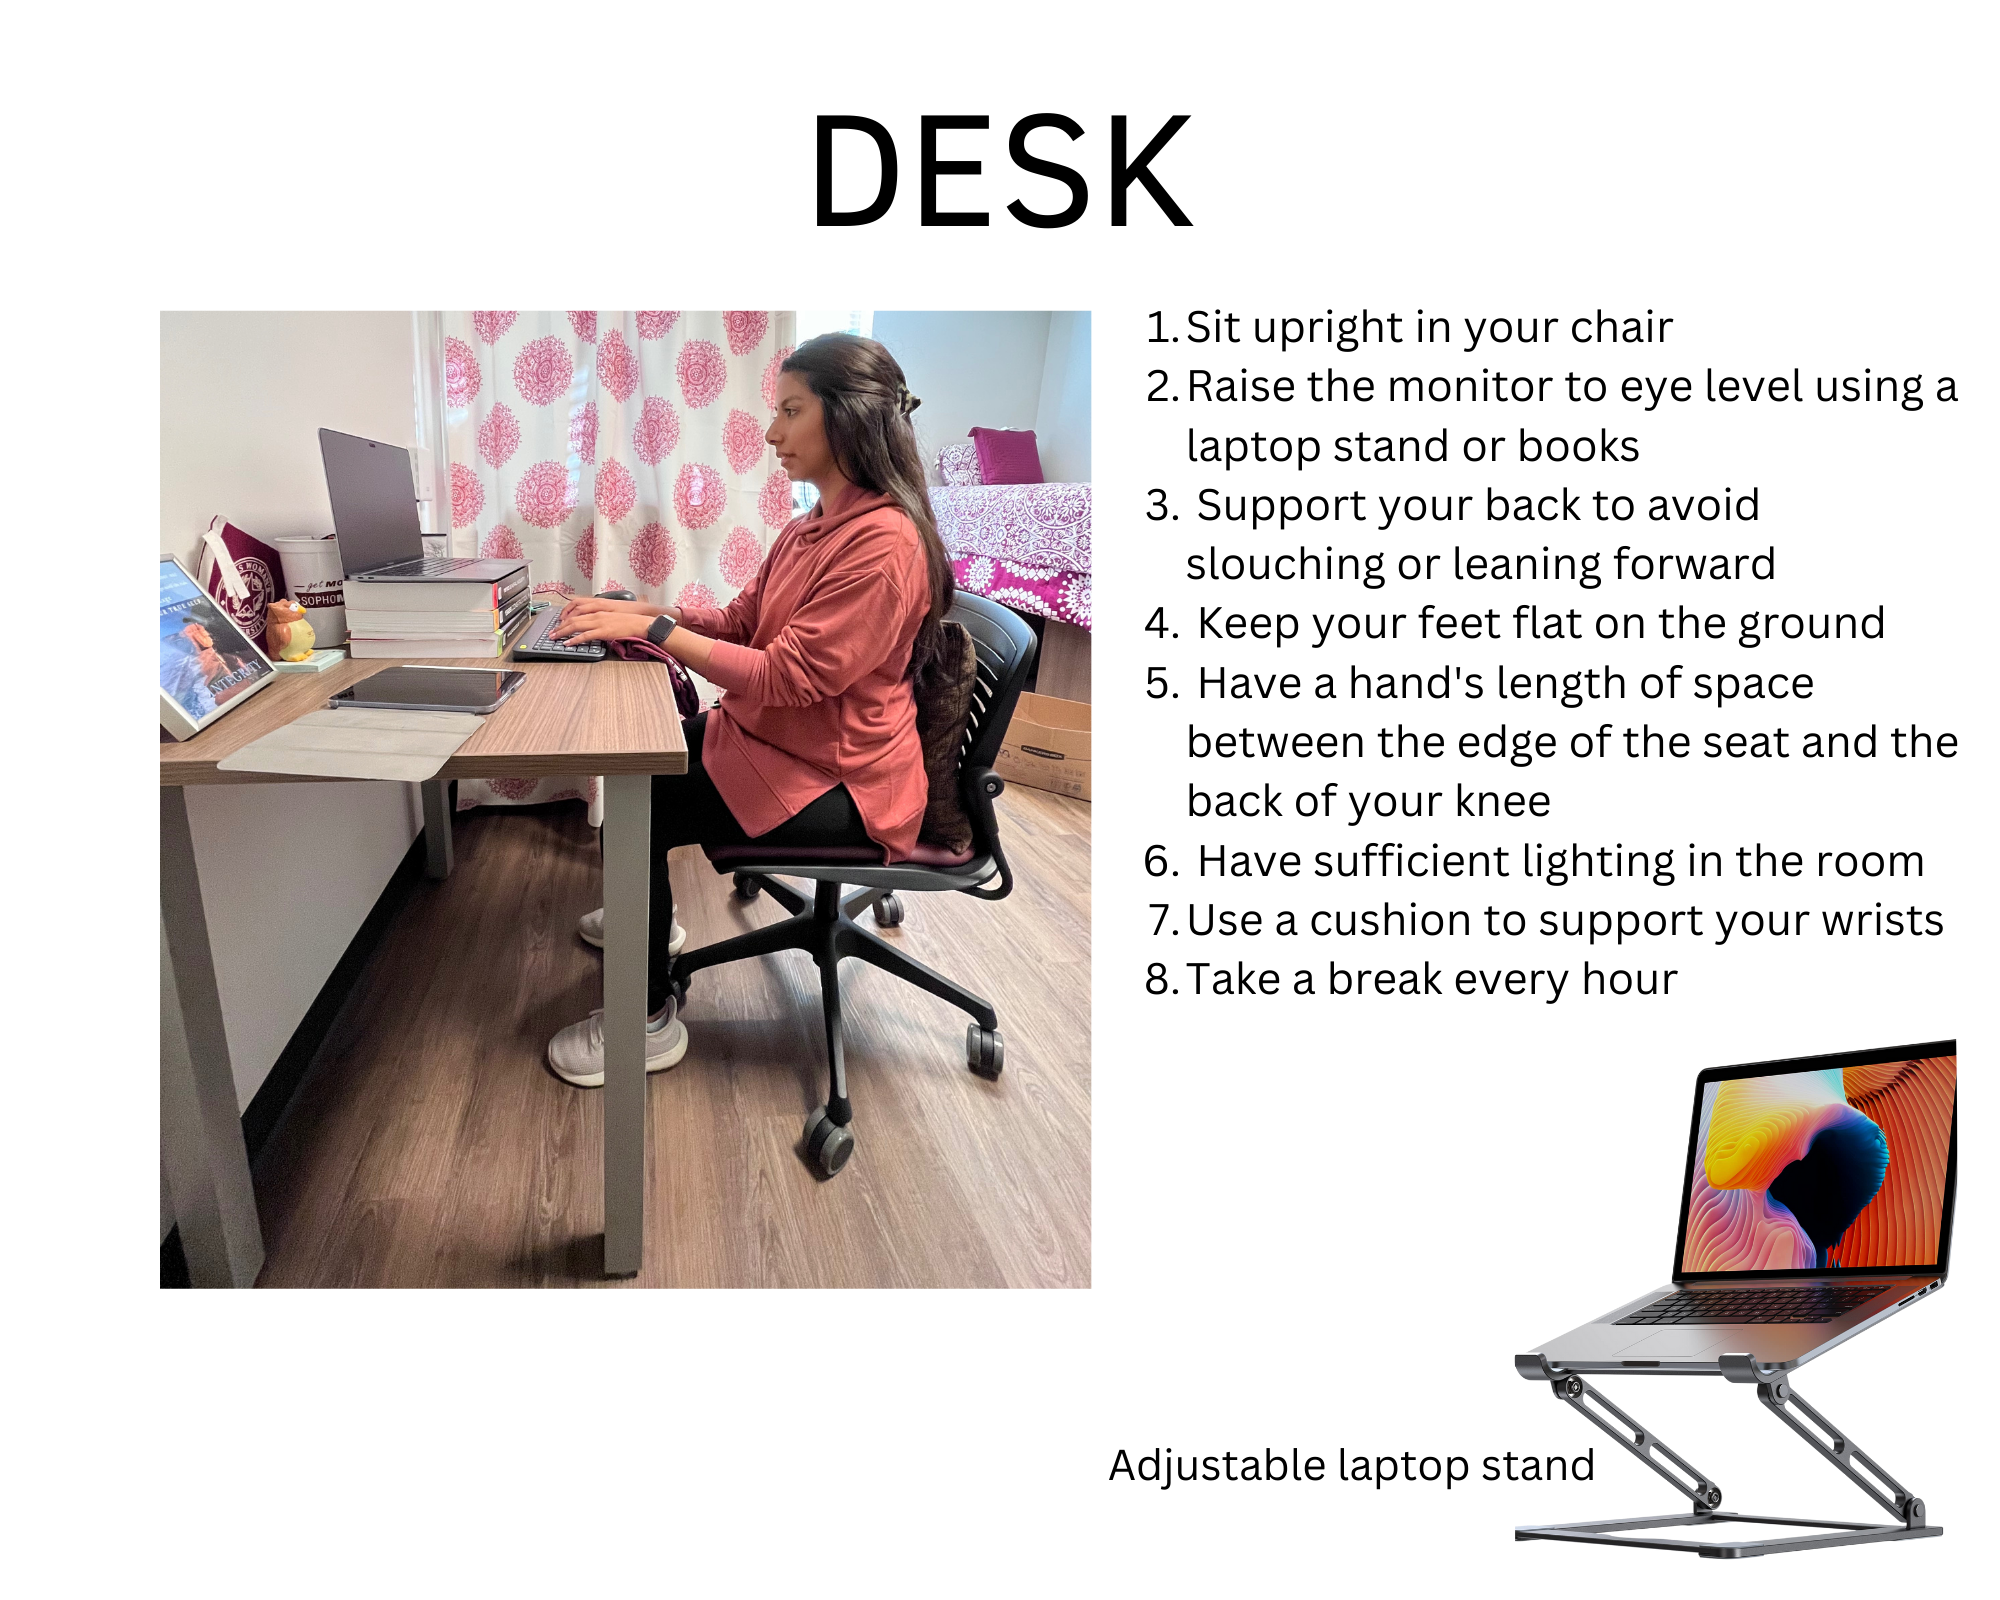 Student sitting at a desk with laptop. Black text on white background: "Desk: 1. Sit upright in chair 2. Raise monitor to eye level using a stand or books 3. Support back to avoid slouching or leaning forward 4. Keep feet flat on ground 5. Have a hand